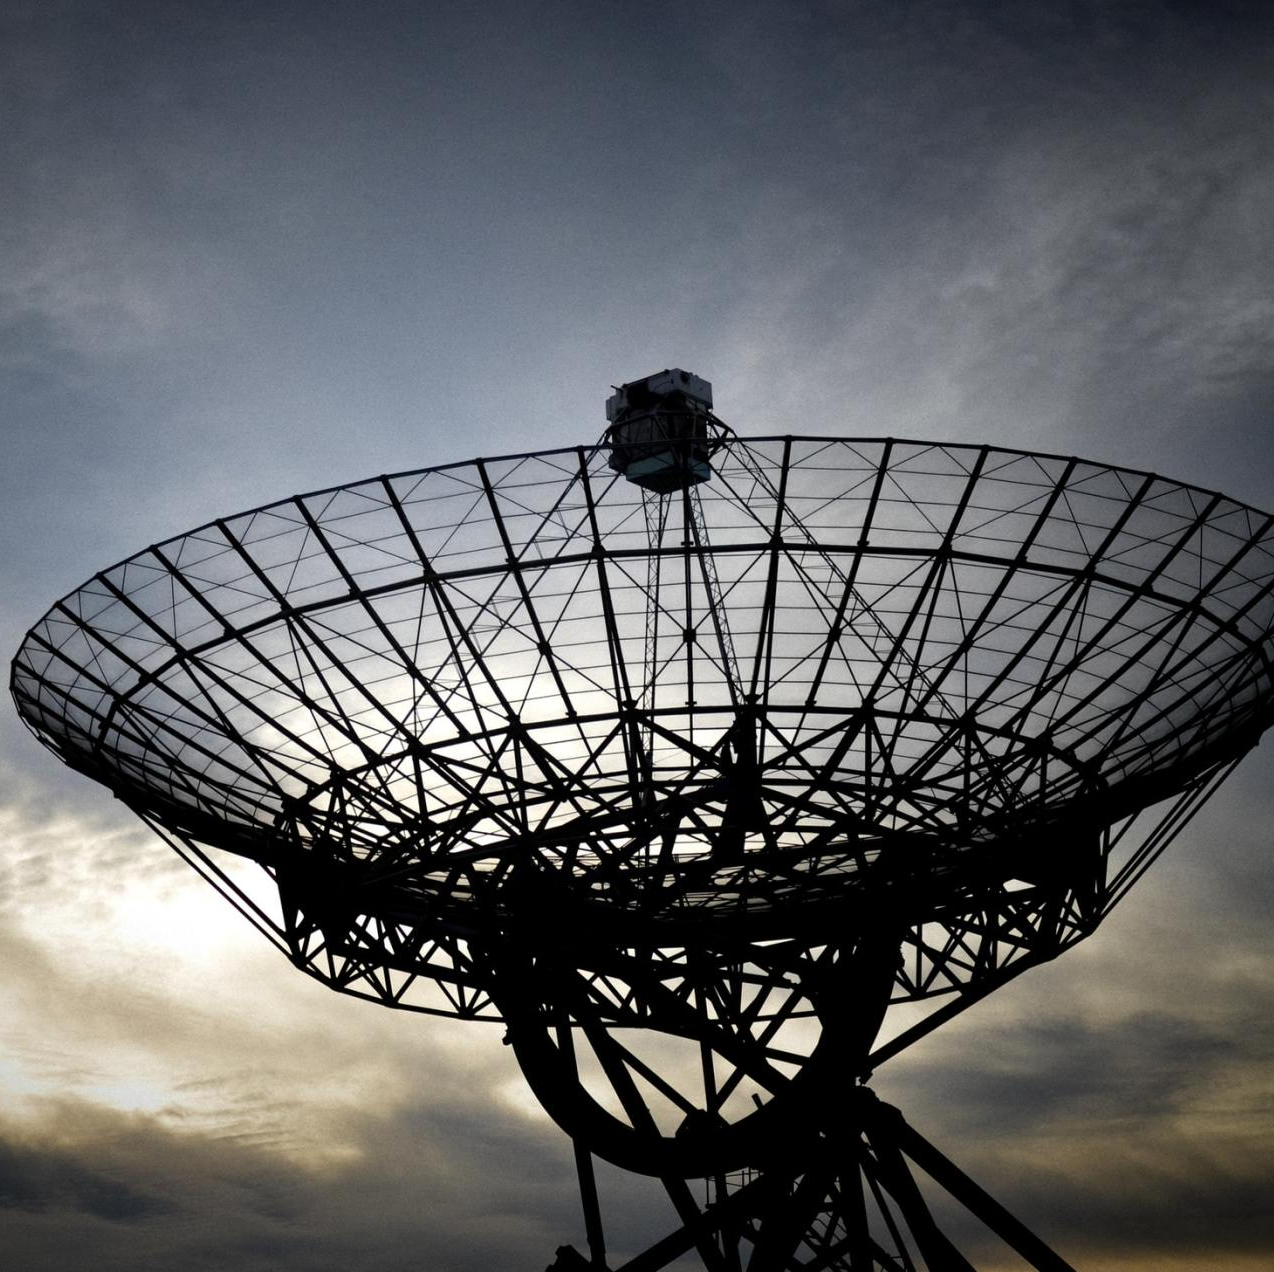 Photograph of a radio telescope against the blue sky with clouds